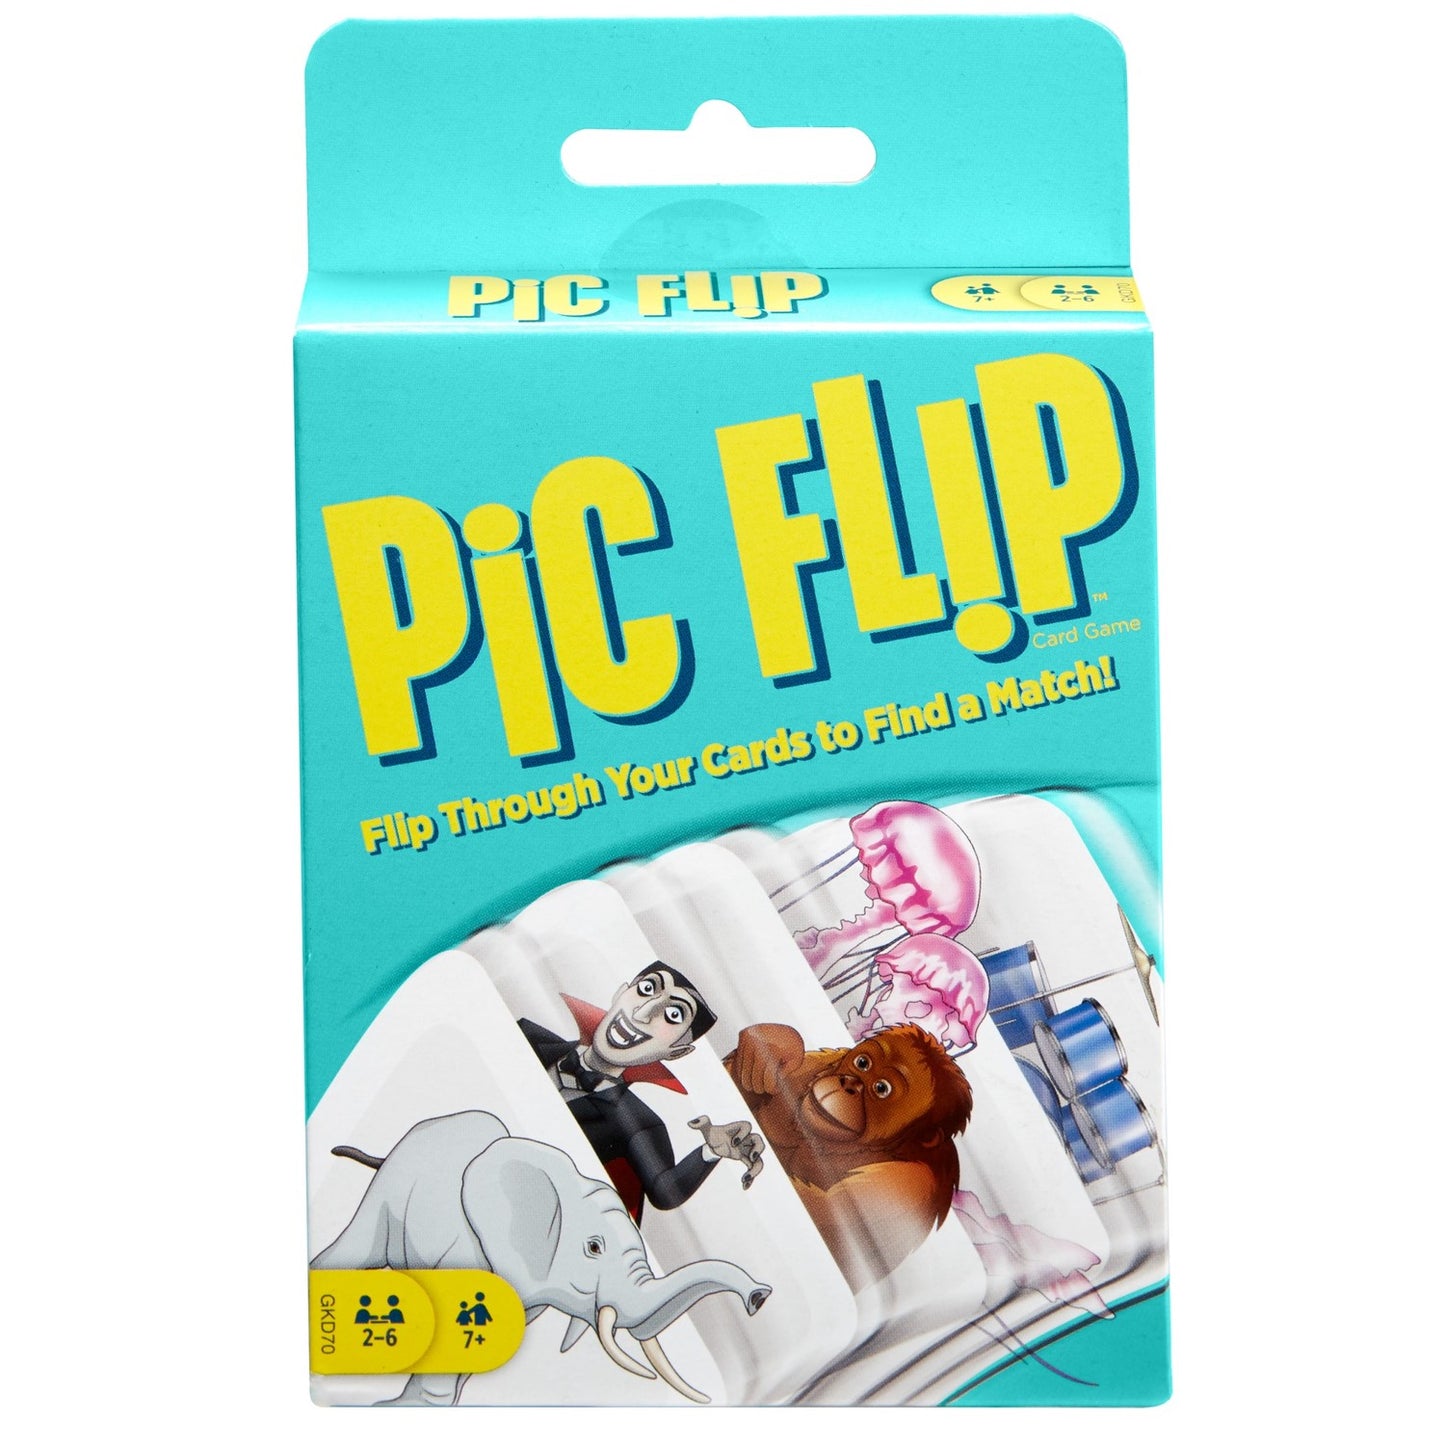 Mattel Card Game Pic Flip Kids will love flipping their cards to find a match